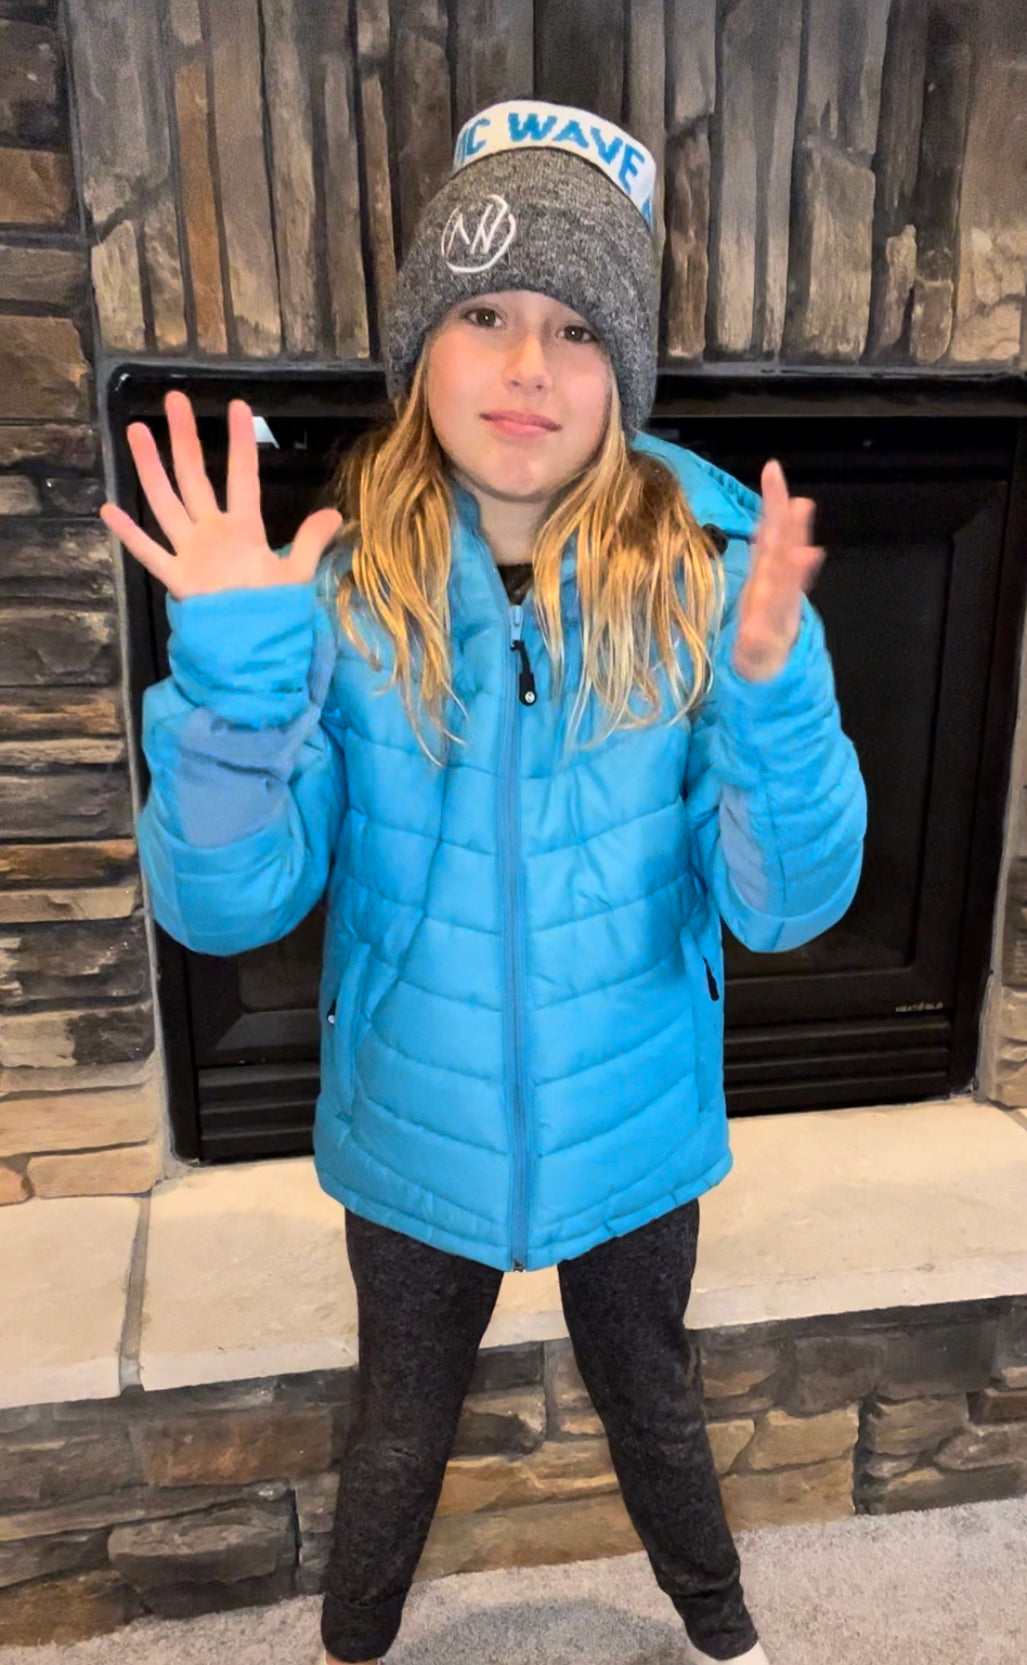 Load video: A video showing how to use the winter coat to go from hands-free to using the mittens and then back to hands-free.